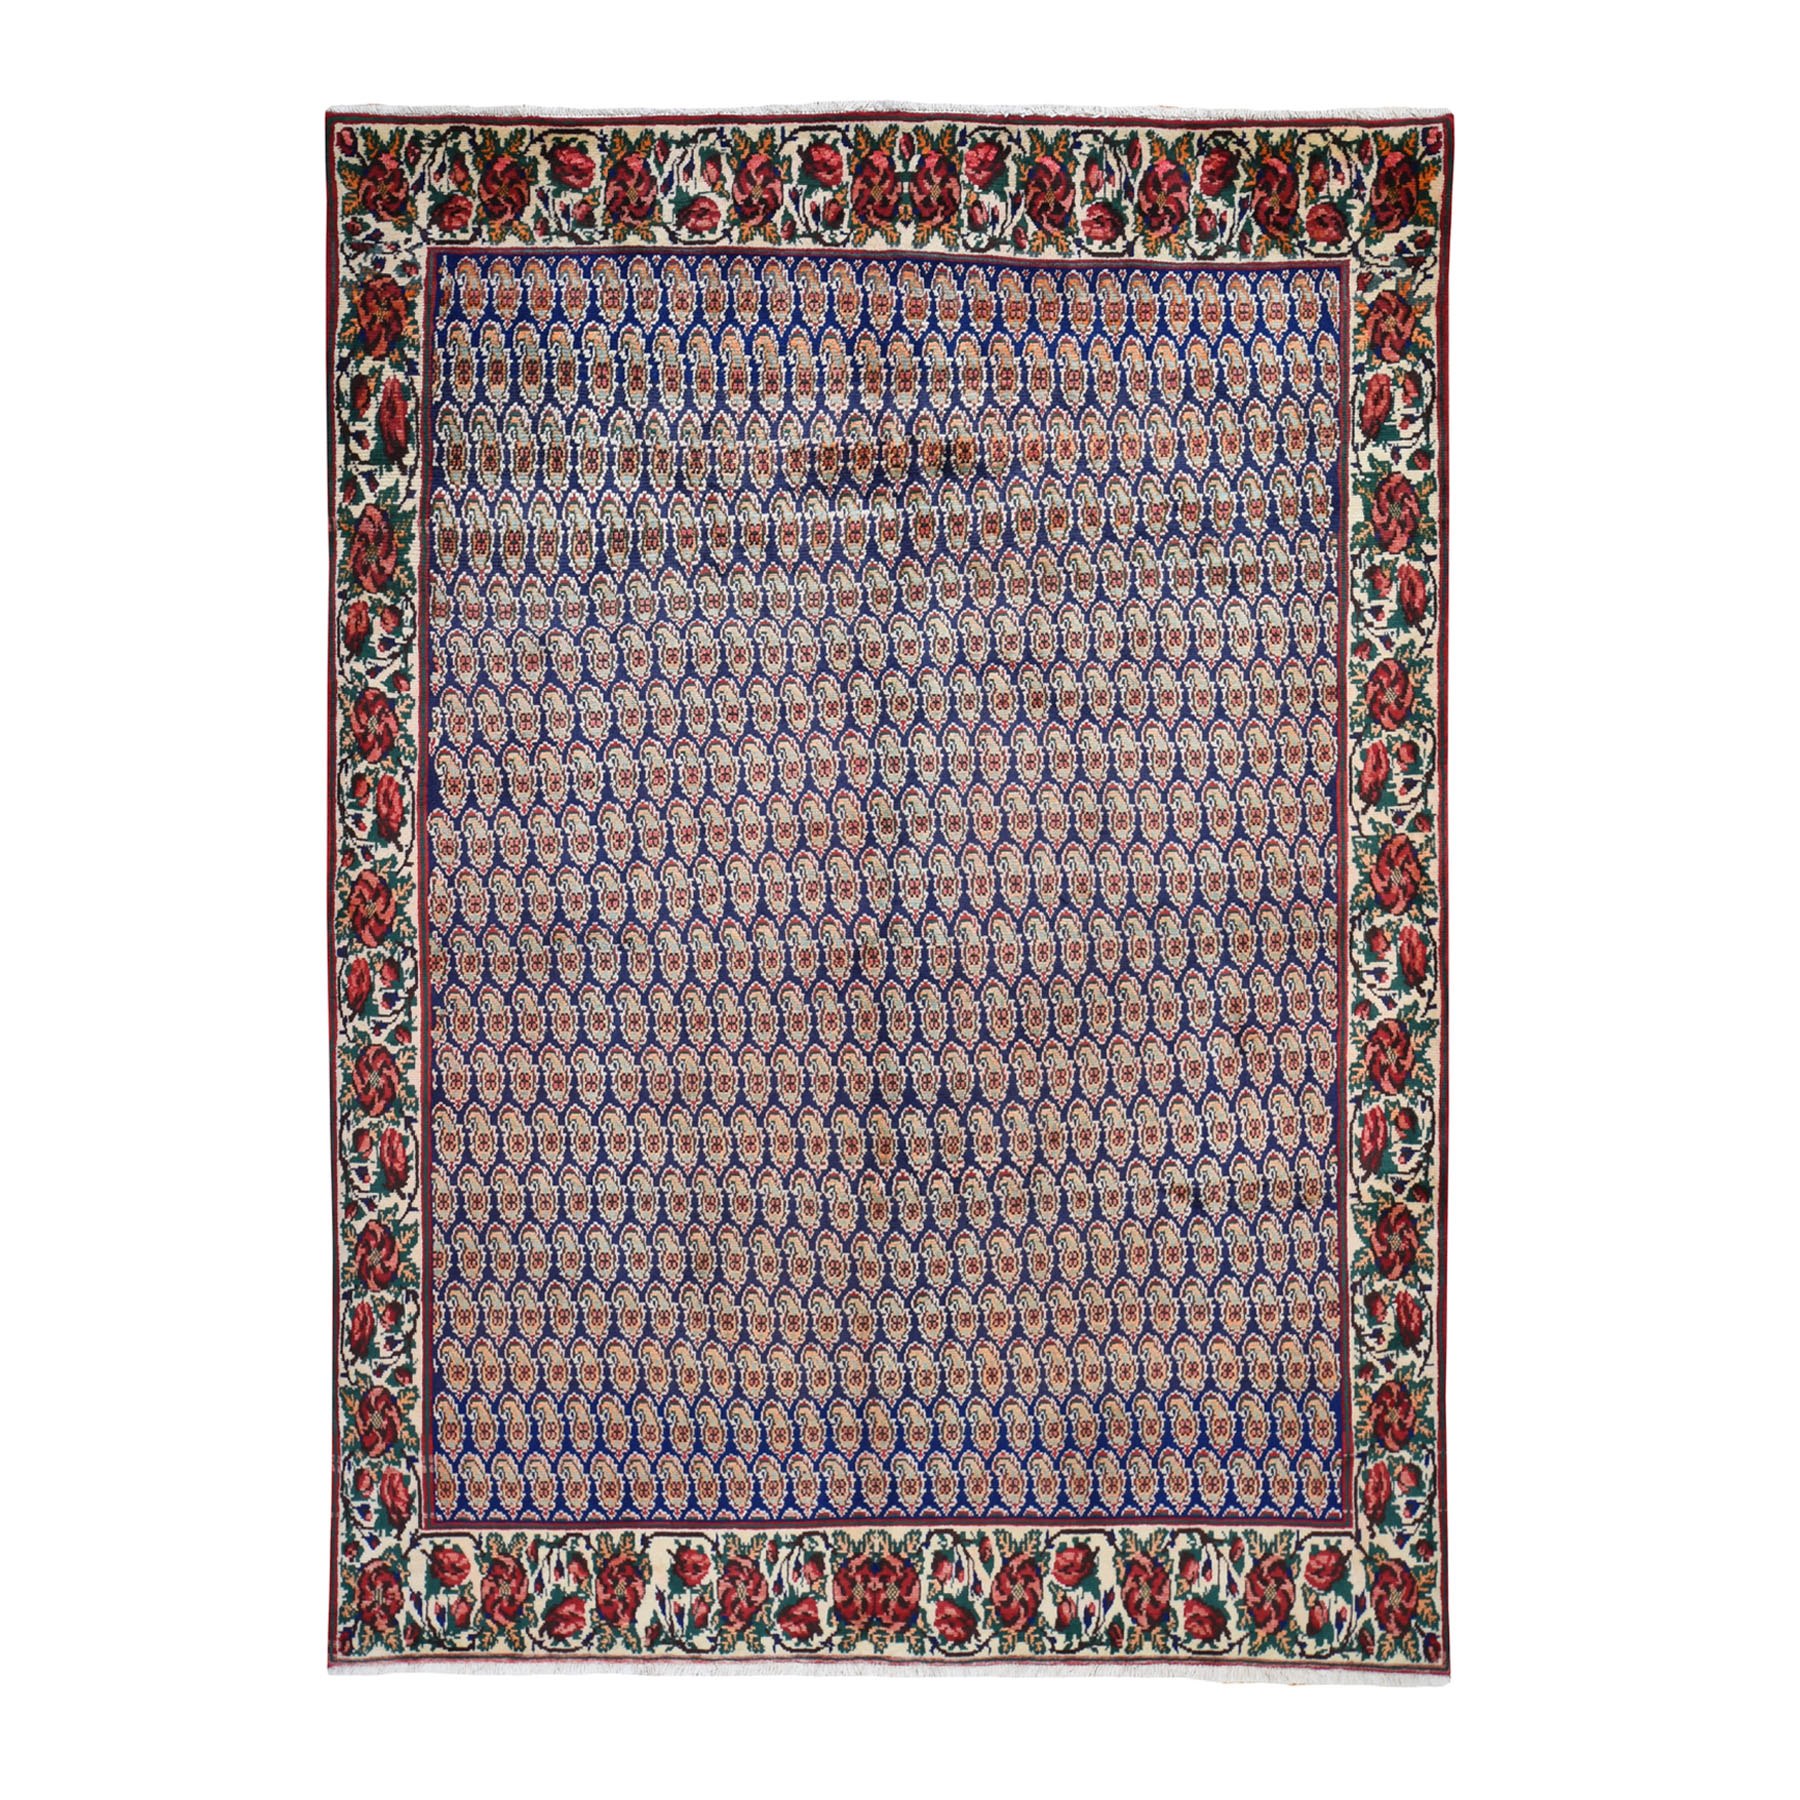 6'x8'8" Blue New Persian Karabakh With Paisley Design Pure wool Hand Woven Oriental Rug 